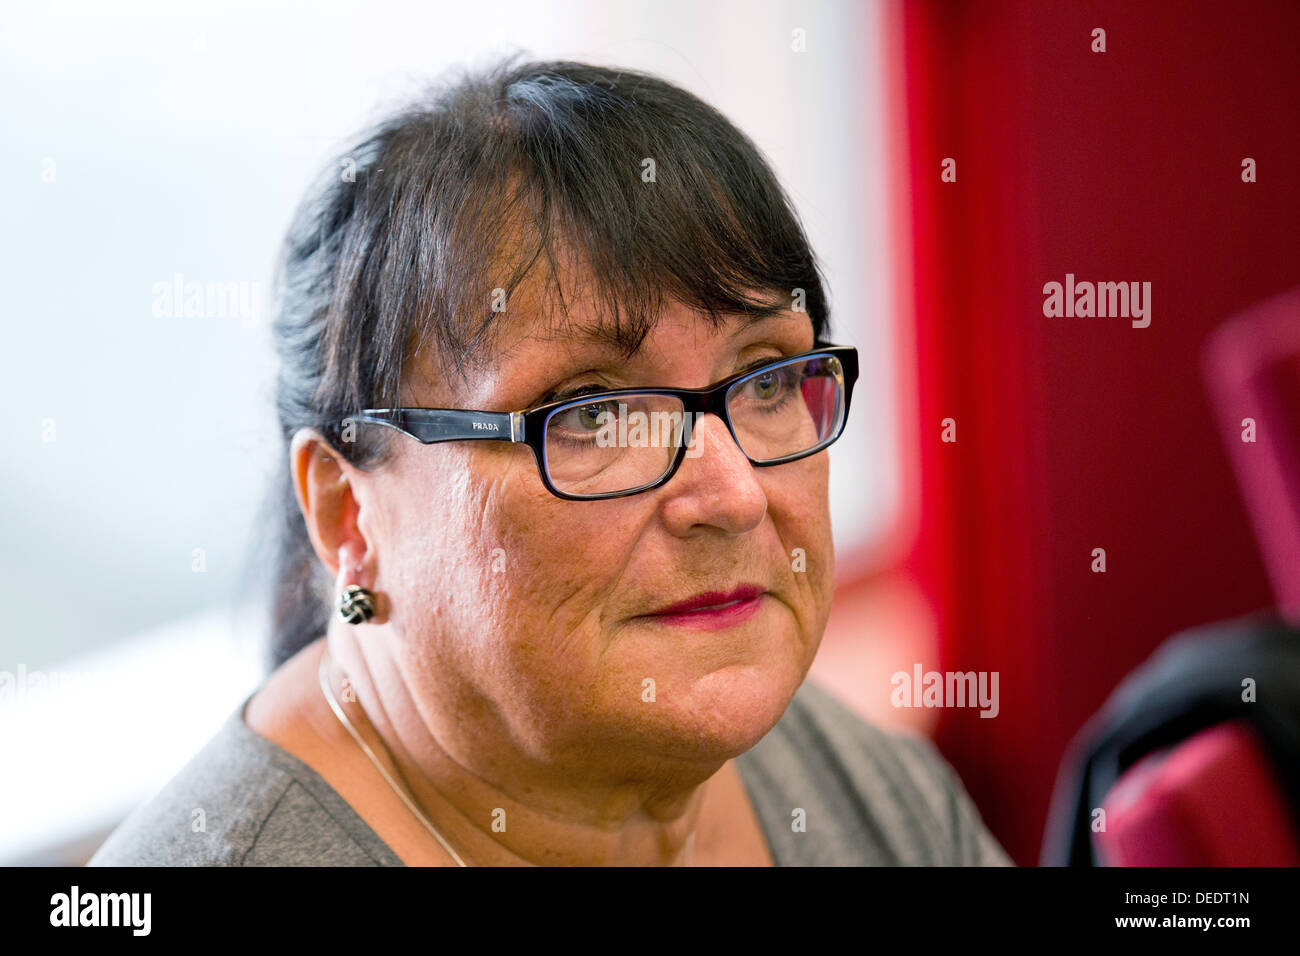 Duesseldorf, Germany. 17th Sep, 2013. Inge Meuter, mother of the murder victim and joint plaitiff, sits in a court room of the district court in Duesseldorf, Germany, 17 September 2013. Nine years after the murder of a young woman in Duessldorf the case has now gone to court. A 39 year old father of a family stands accused of the murder. Photo: ROLF VENNENBERND/dpa/Alamy Live News Stock Photo